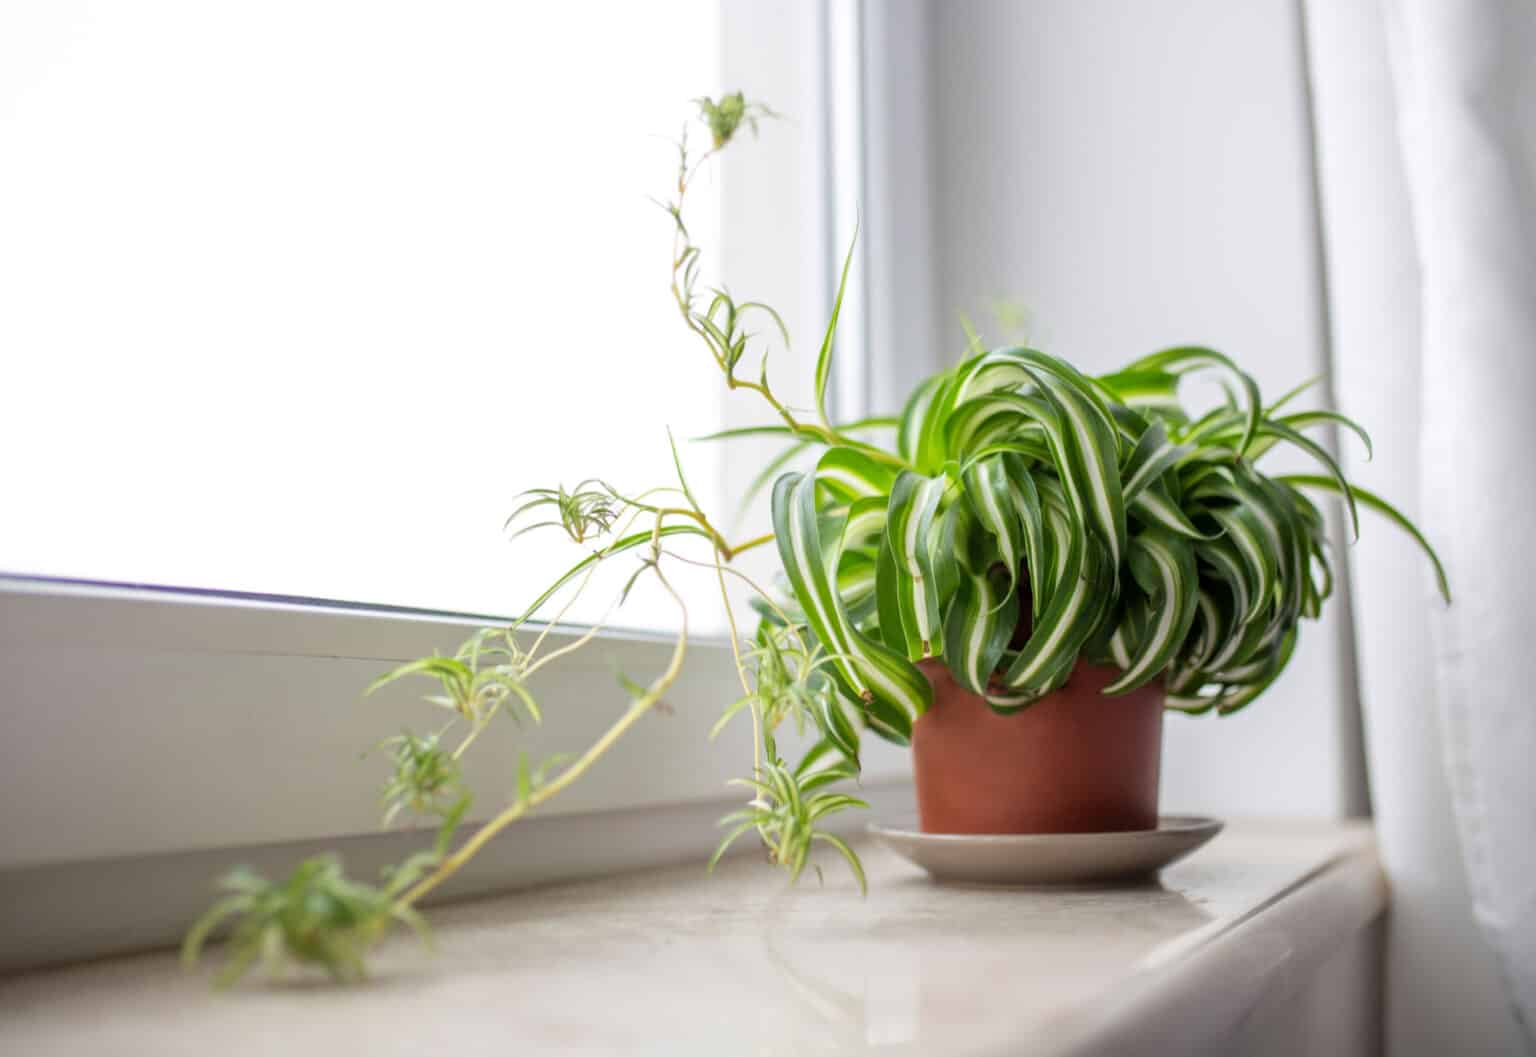 13 Spider Plant Benefits and Other Facts - A-Z Animals